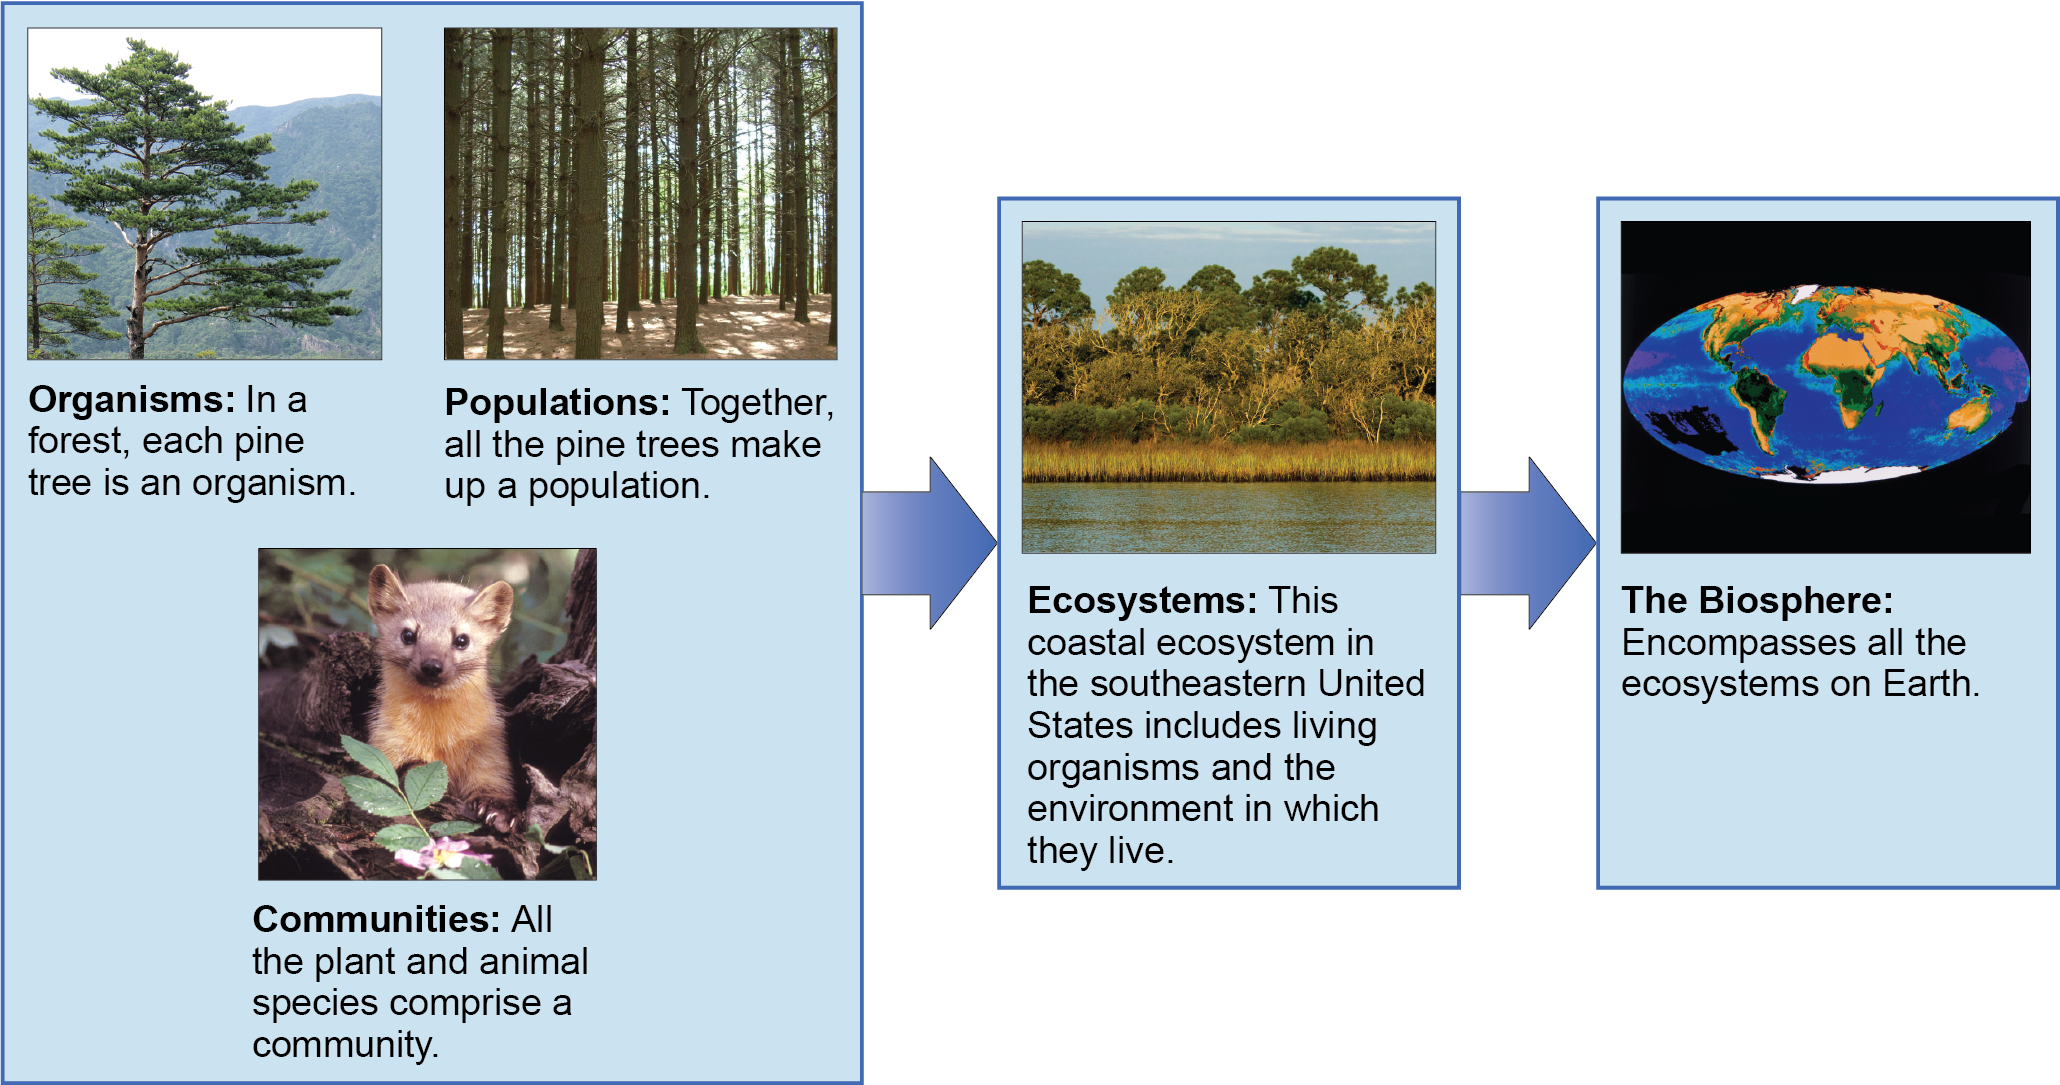 A flow chart of three boxes shows the hierarchy of living organisms. The top box is labeled Organisms, and a picture of a tree is shown; then populations, and a picture of a forest is shown; and then communities, and a picture of a marmot is shown. The second box is labeled ecosystems; and has a photograph of a body of water, behind which is a stand of tall grasses developing into more dense vegetation and trees as distance from the water increases. The third box is labeled as the biosphere; and shows a drawing of planet Earth.